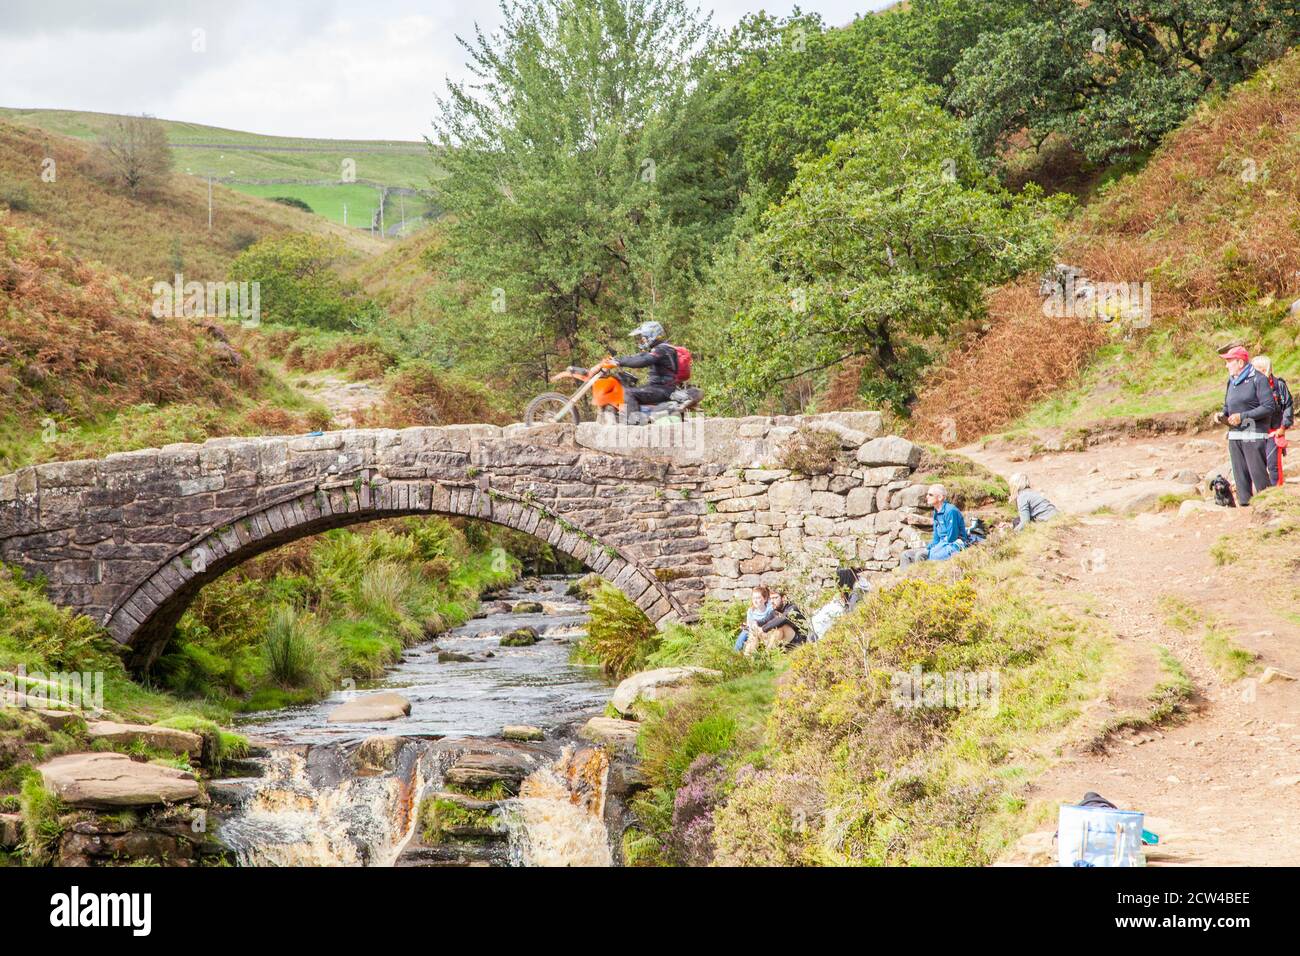 Off road motorcyclists using a green lane trail  crossing the stone bridge at the three shires head  in the Peak District national park  England UK Stock Photo